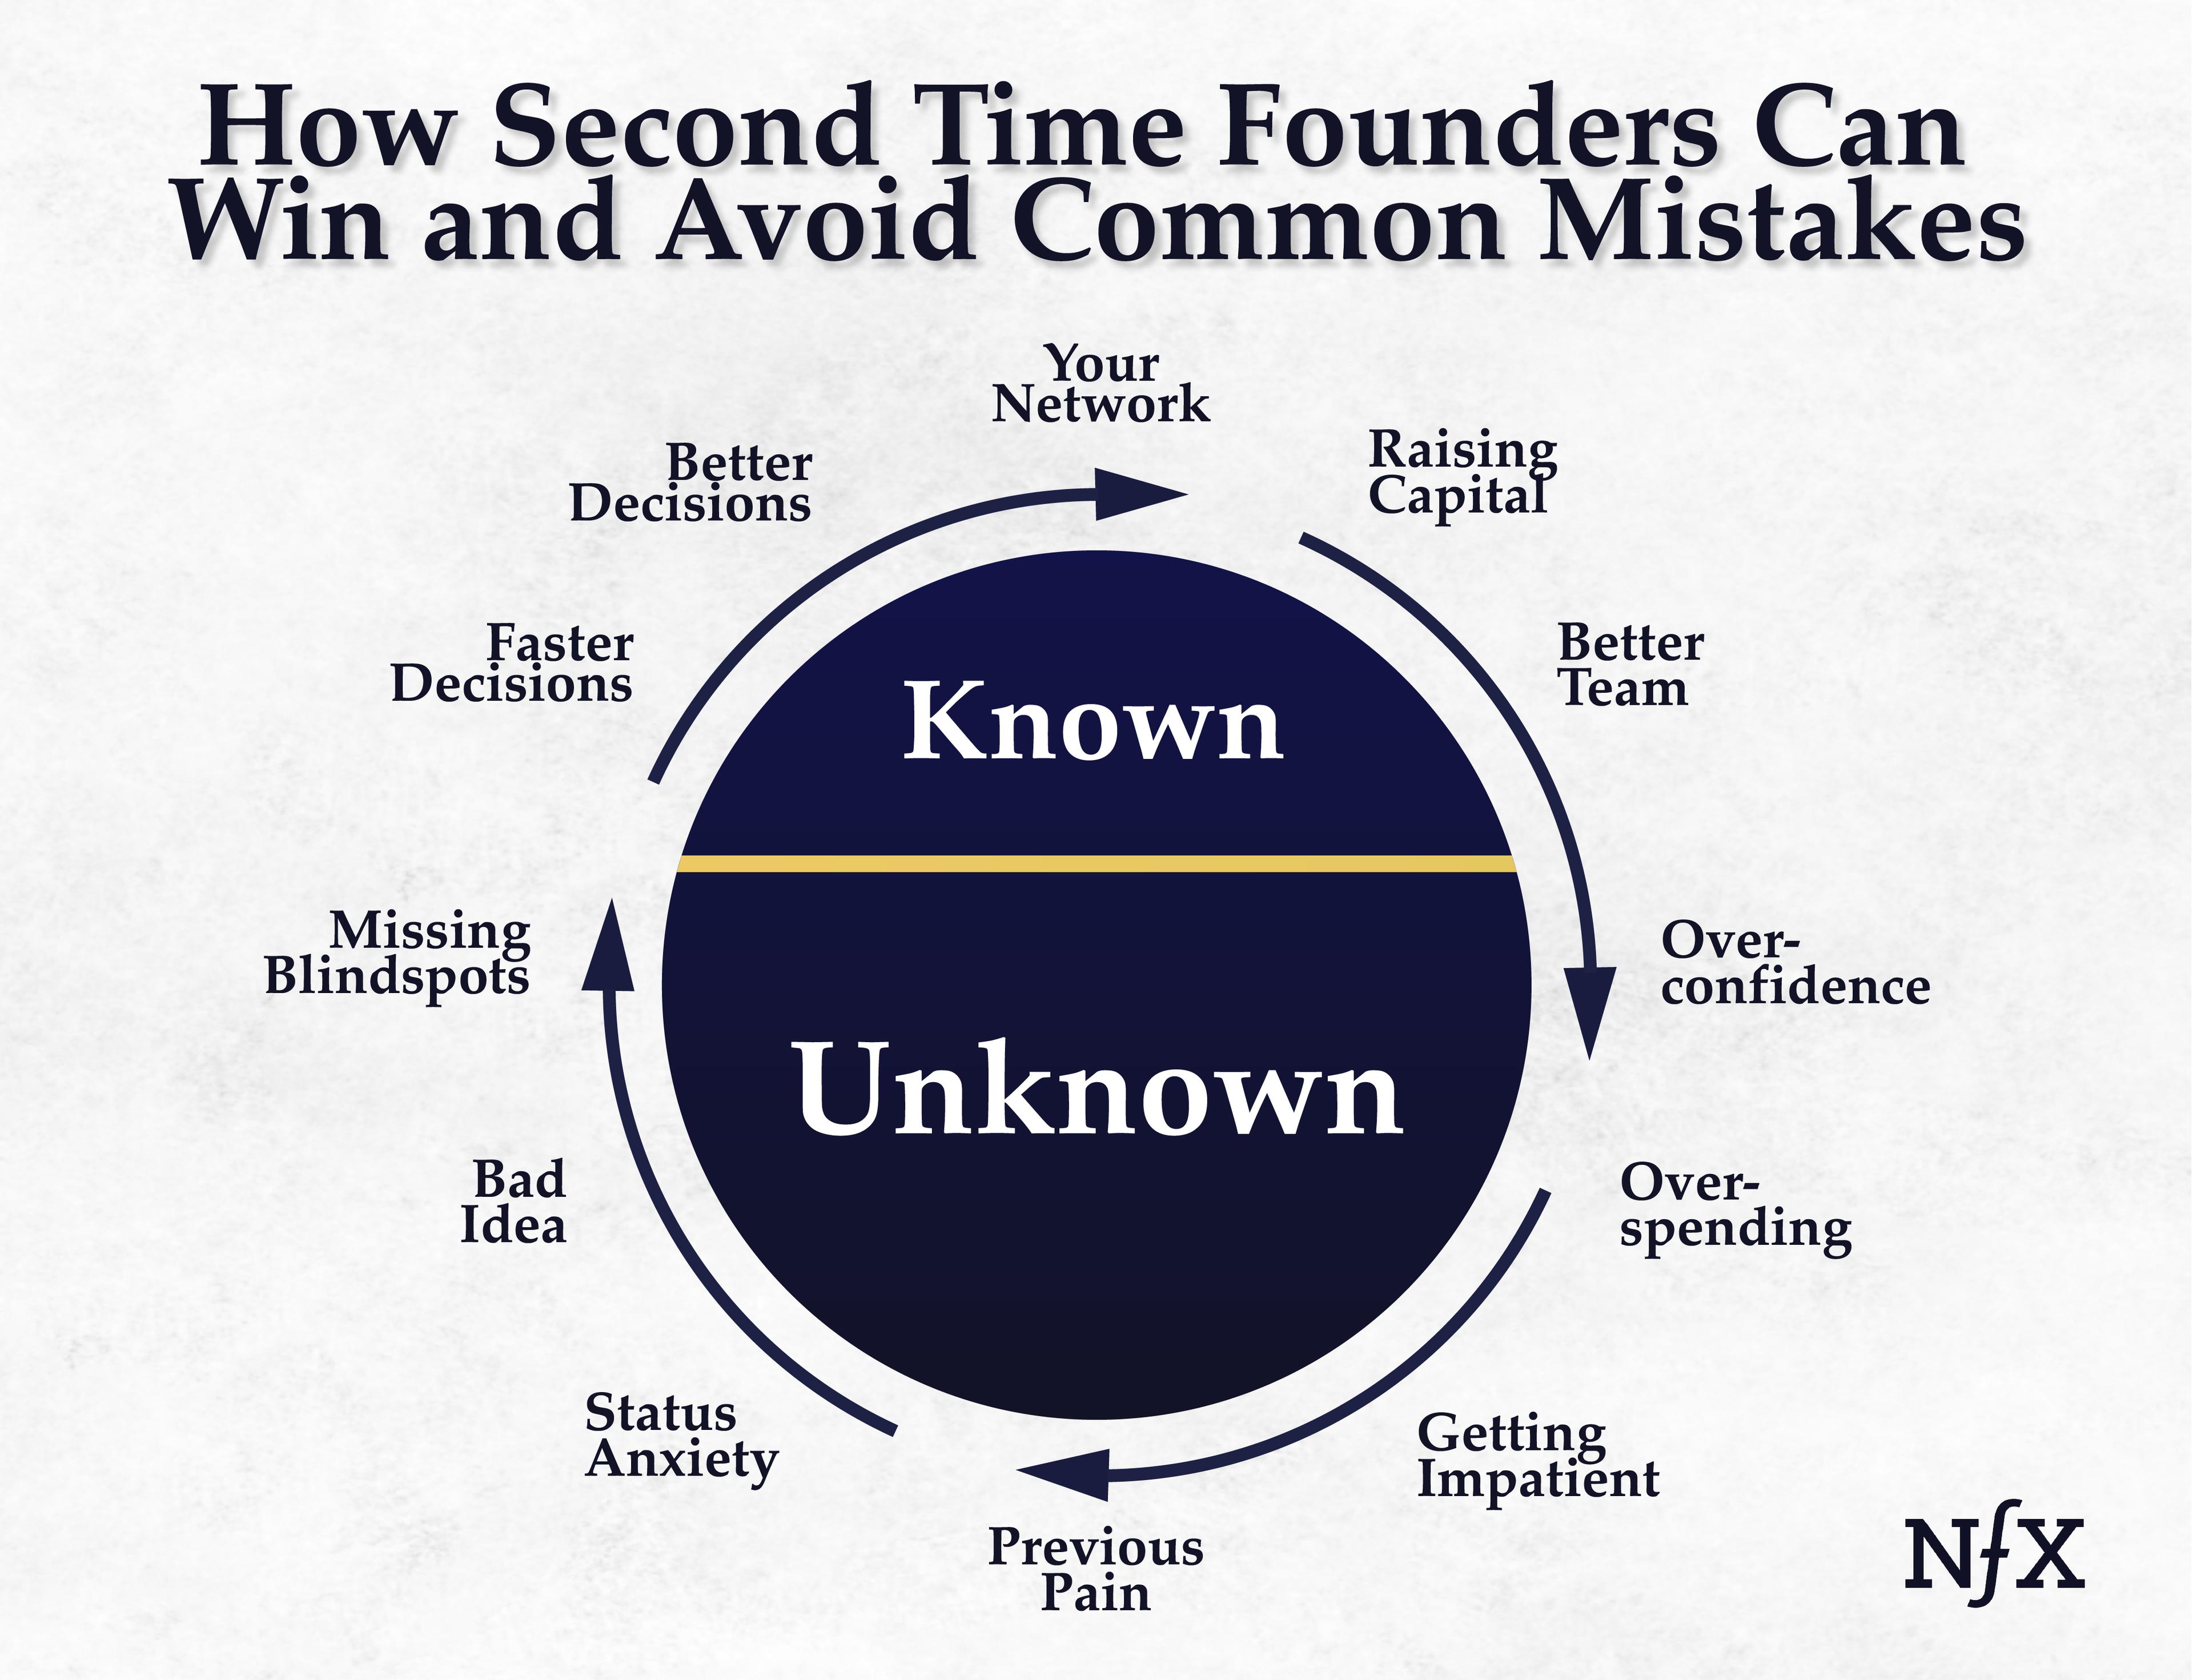 Second Time Founders Manual - Knowns and Unknowns